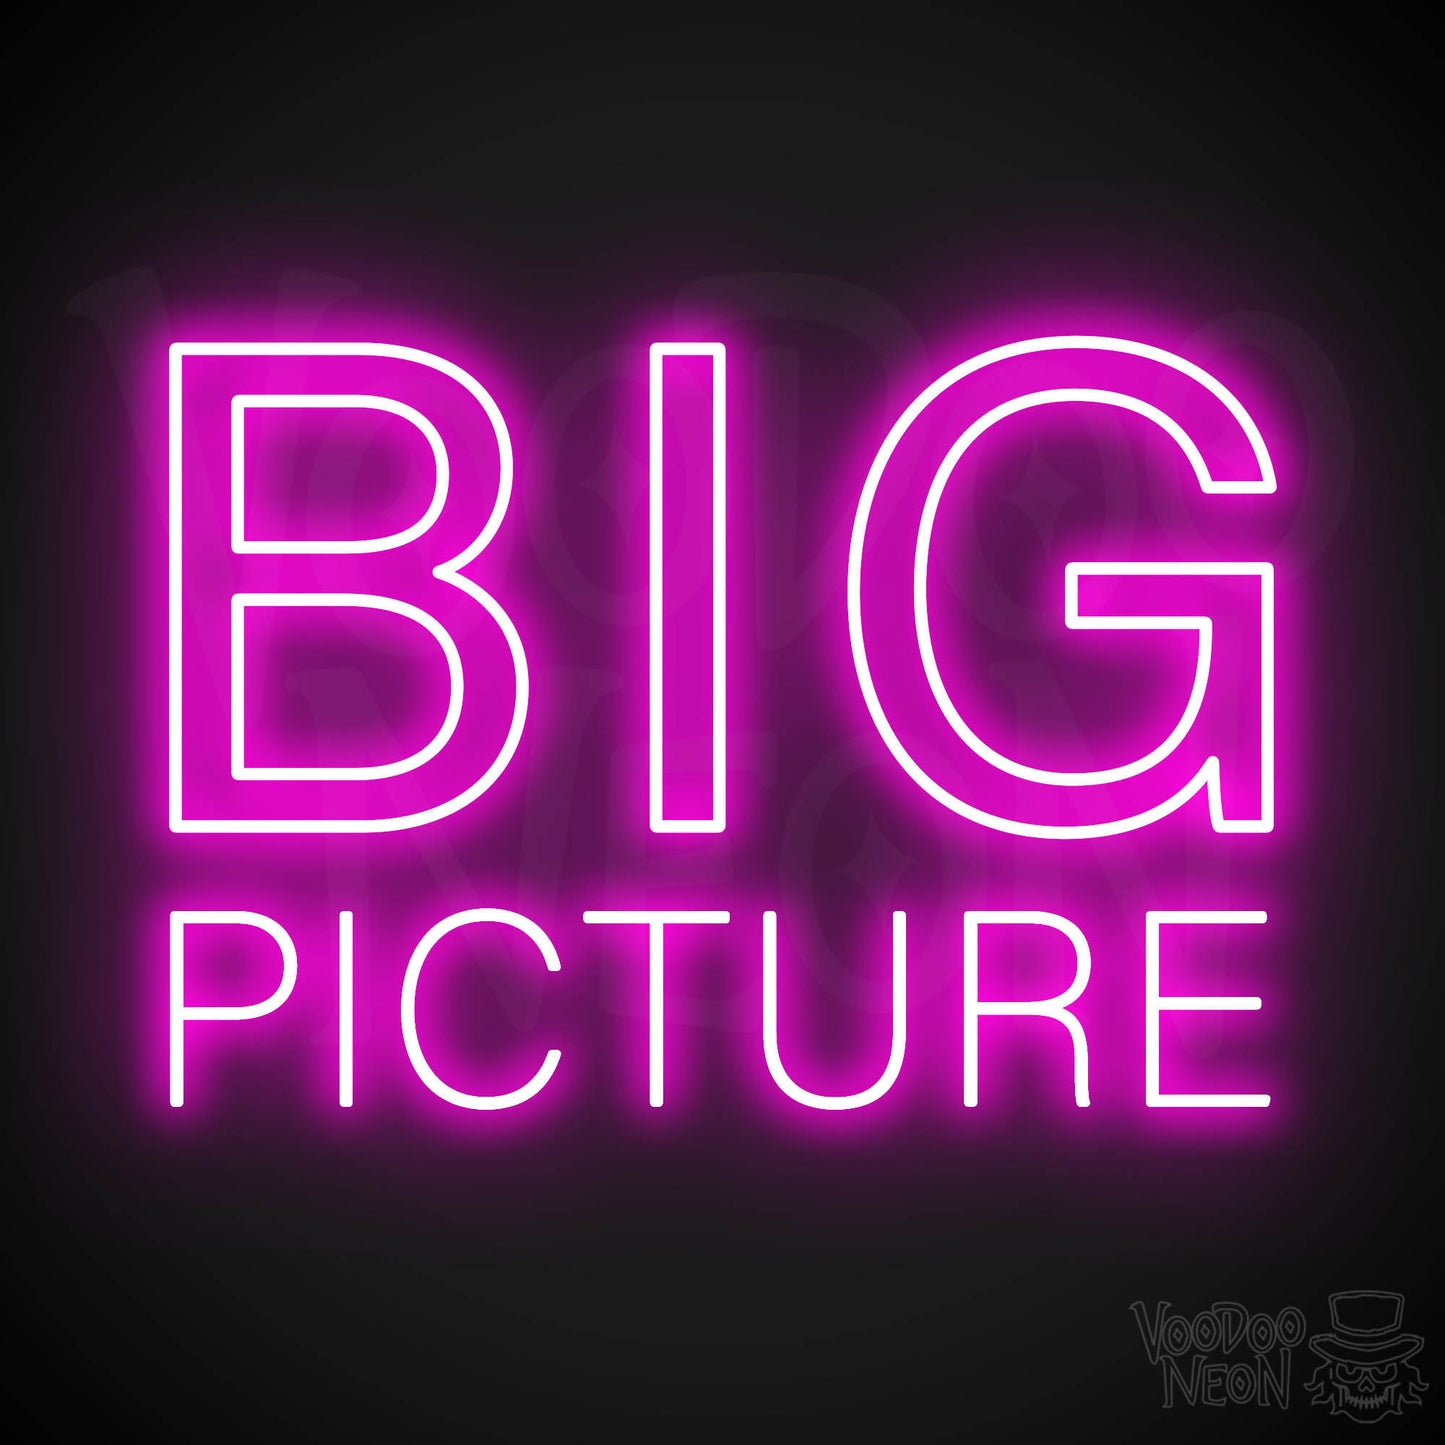 Big Picture LED Neon - Pink